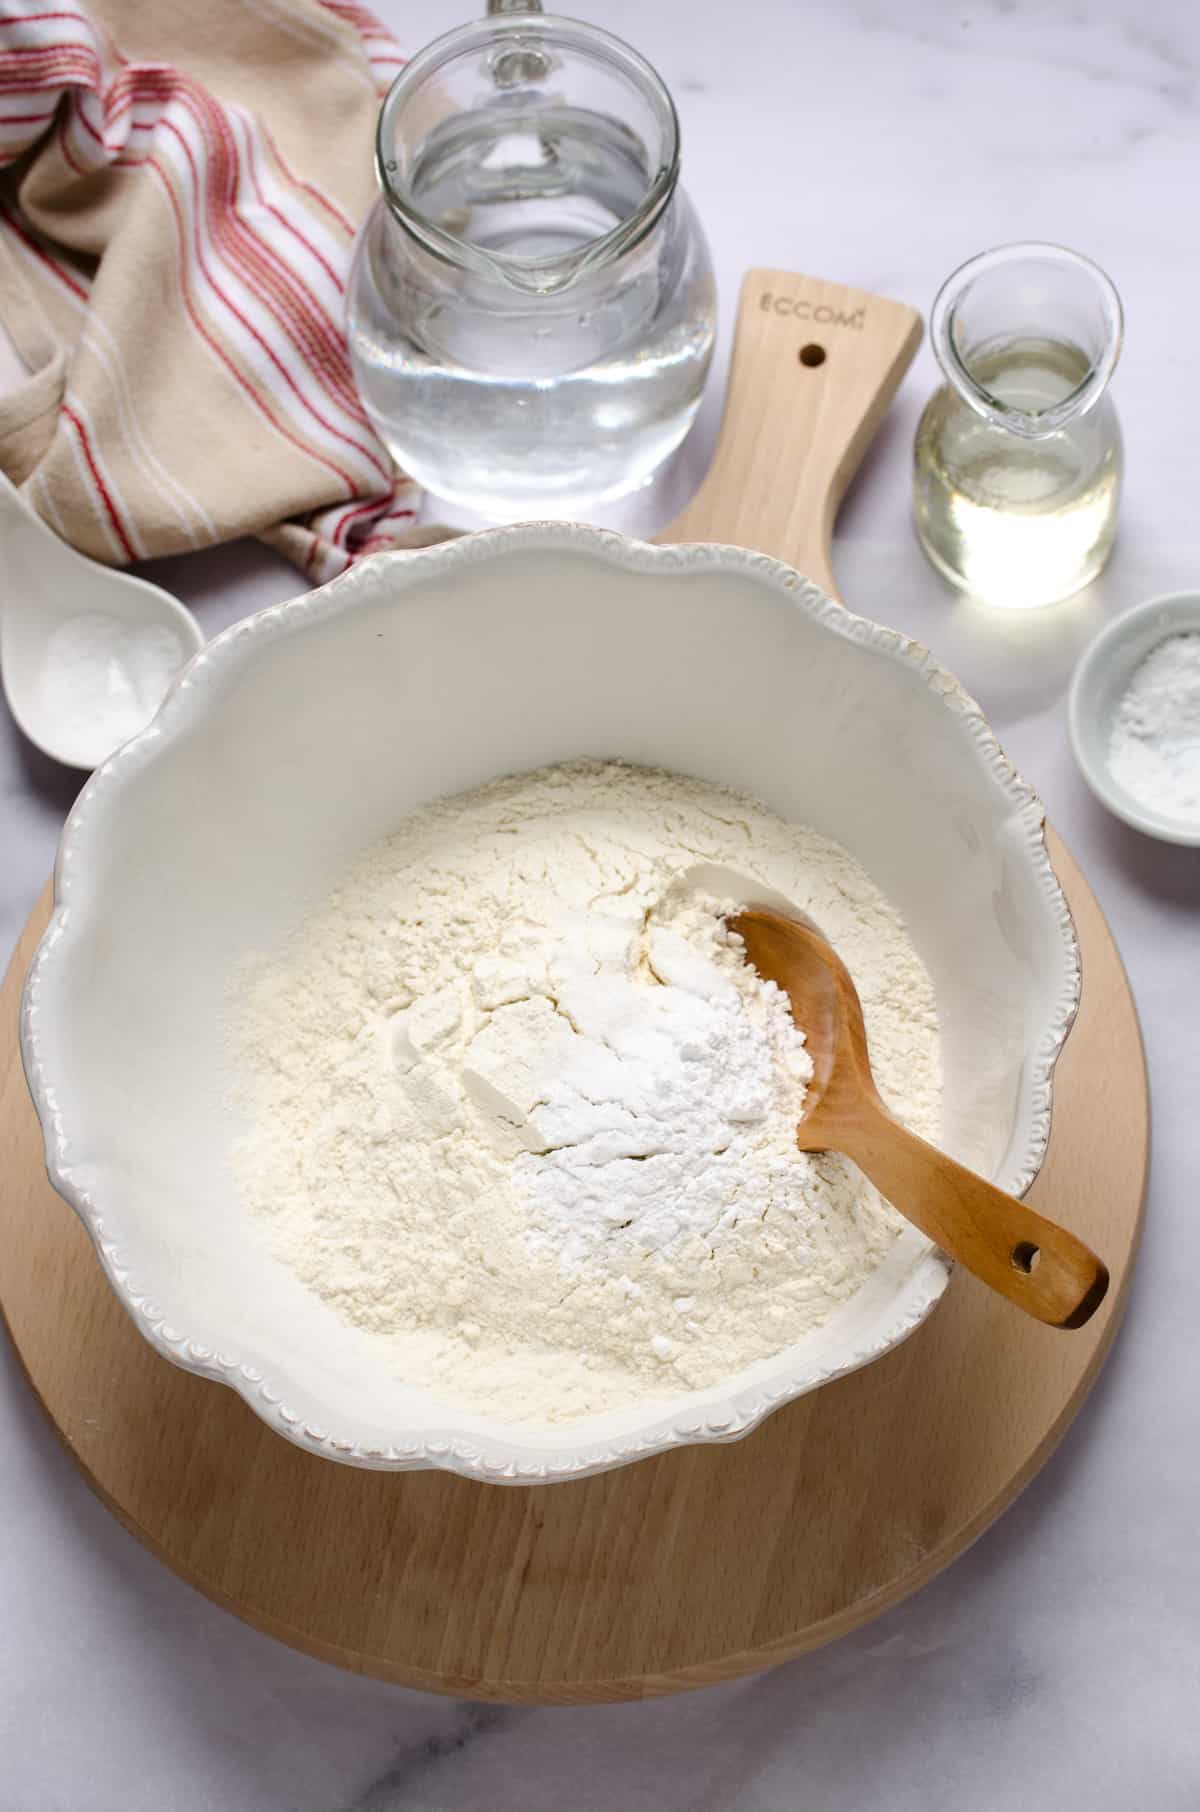 A wooden spoon combining the dry pizza dough ingredients in a mixing bowl